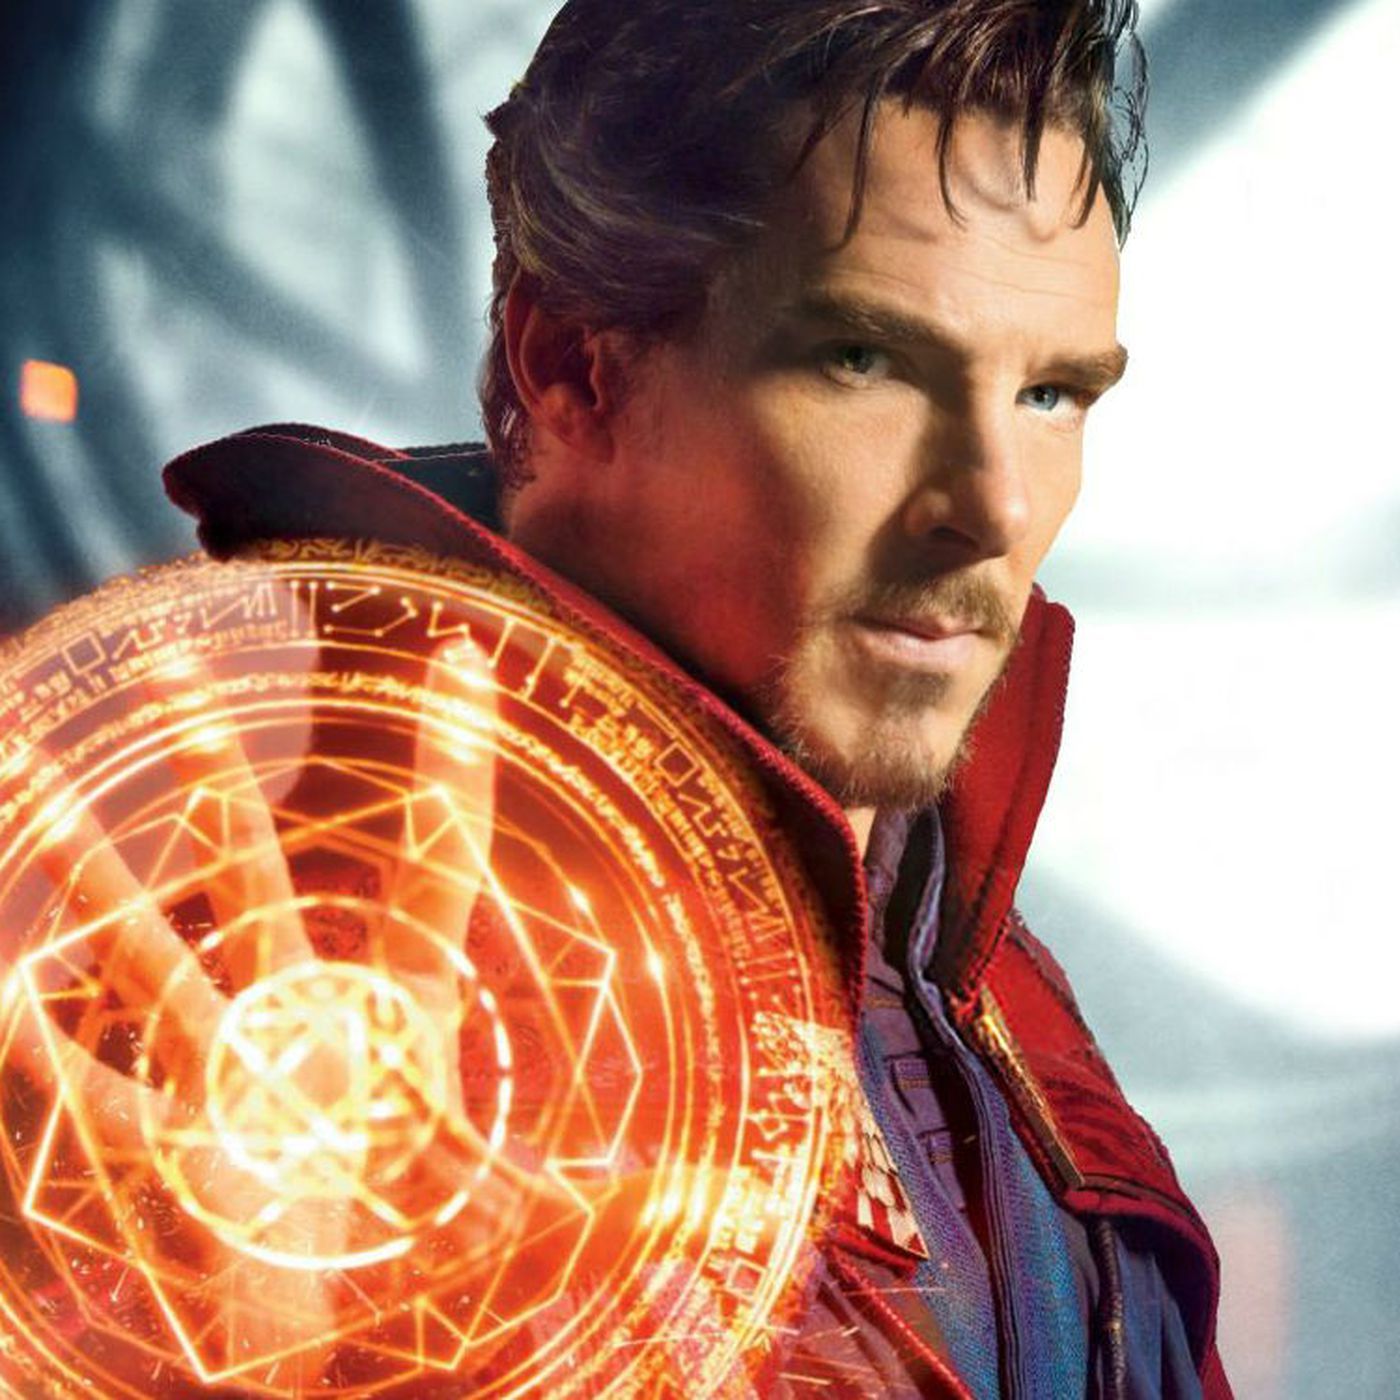 Doctor Strange's murky morality brings it close to being a supervillain origin story